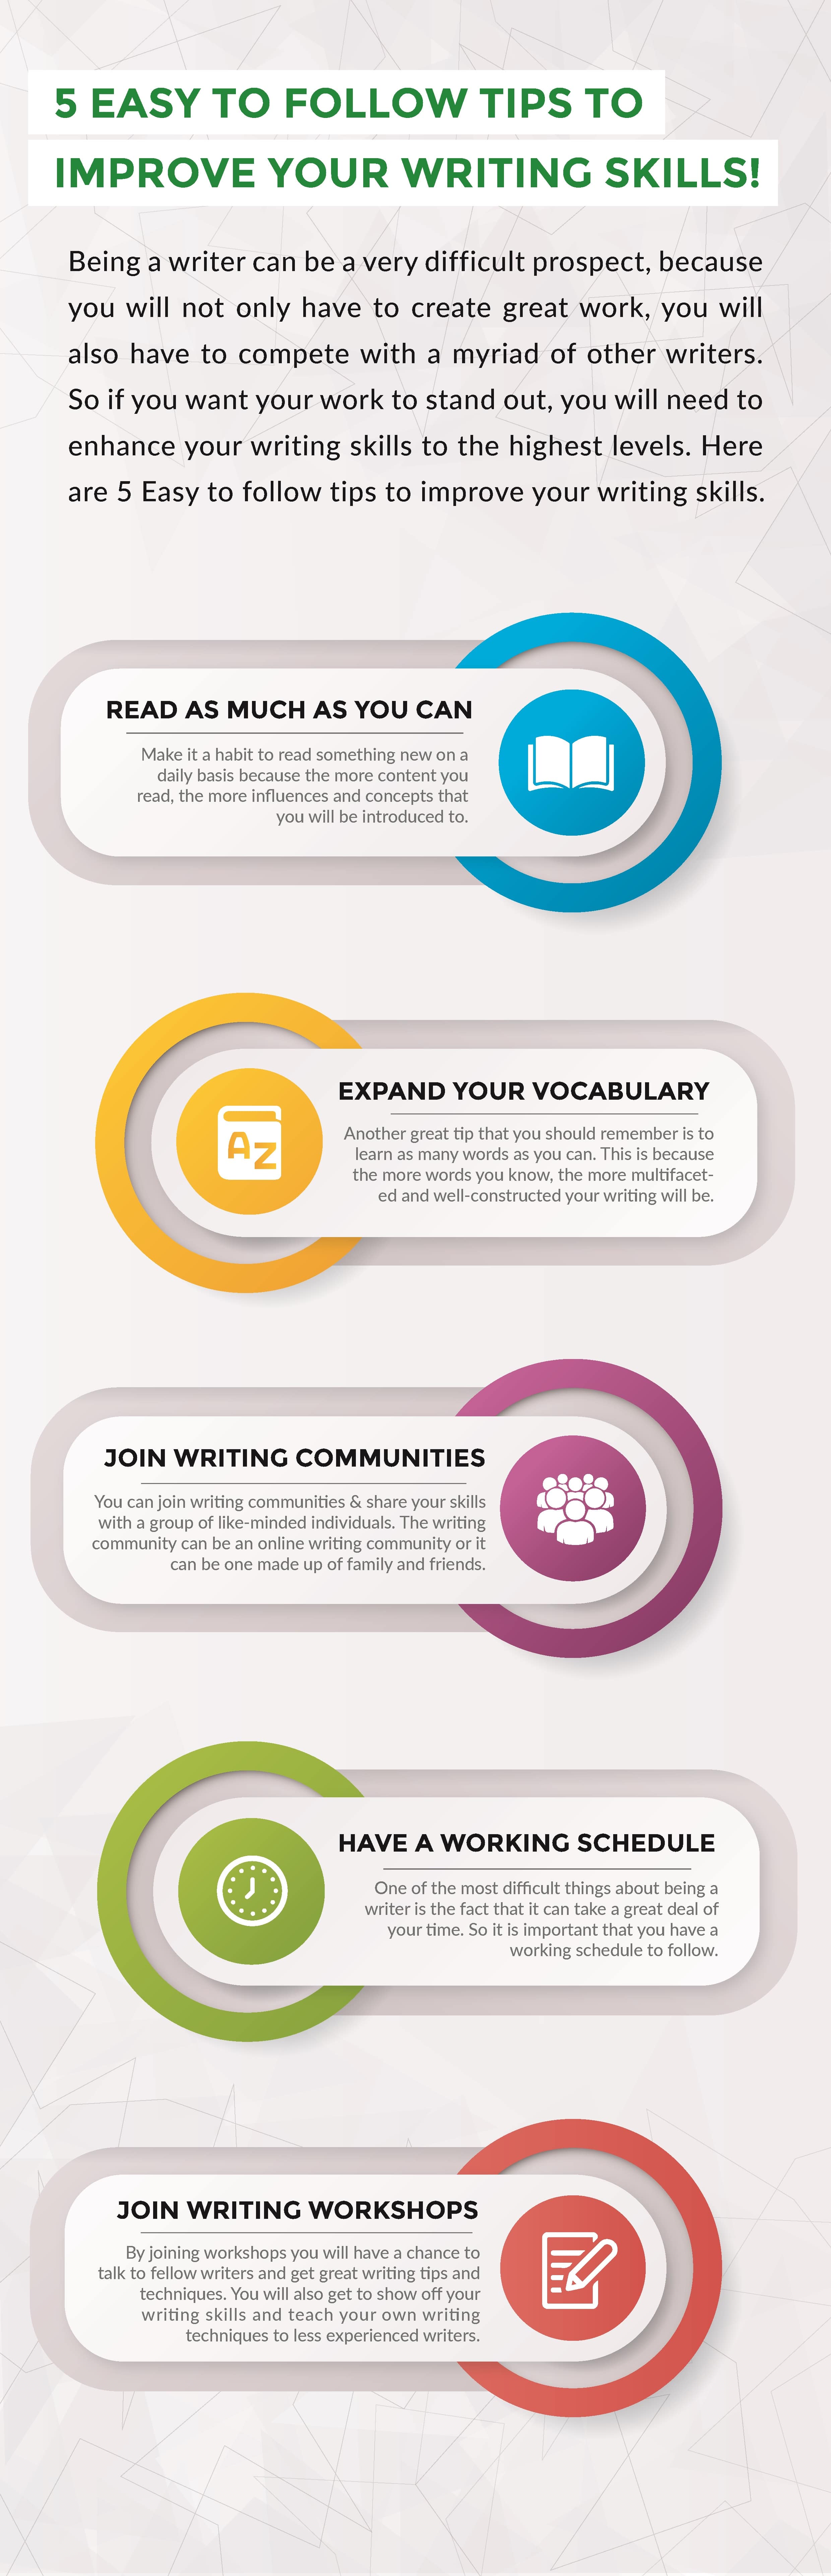 5 Easy to Follow Tips to Improve Your Writing Skills!